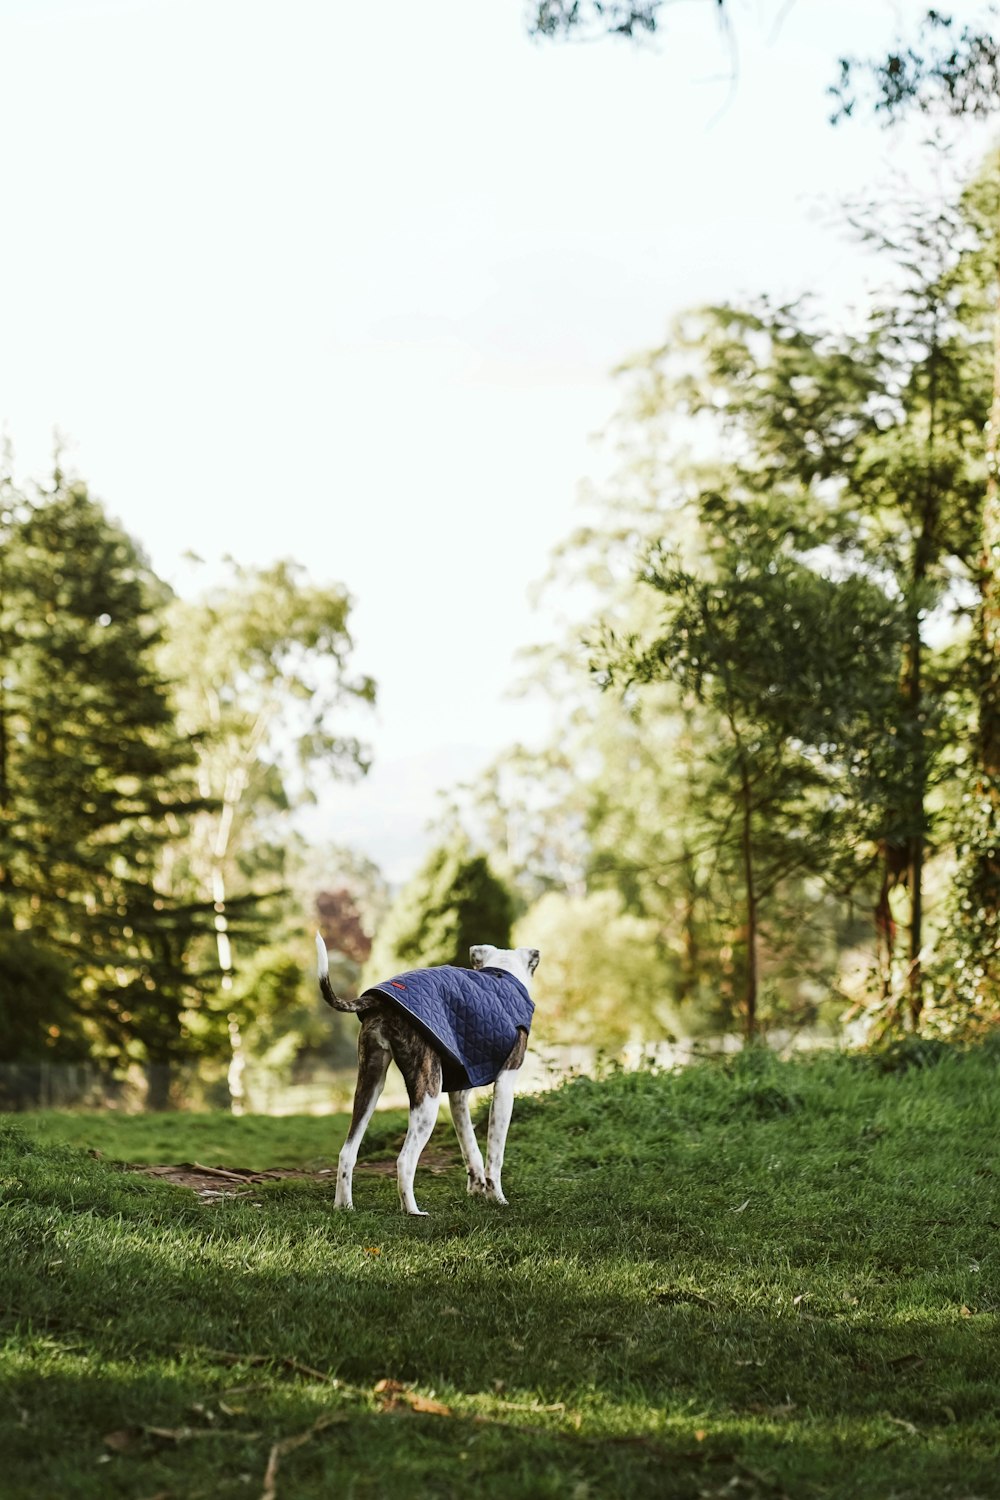 a dog wearing a blue jacket standing in the grass